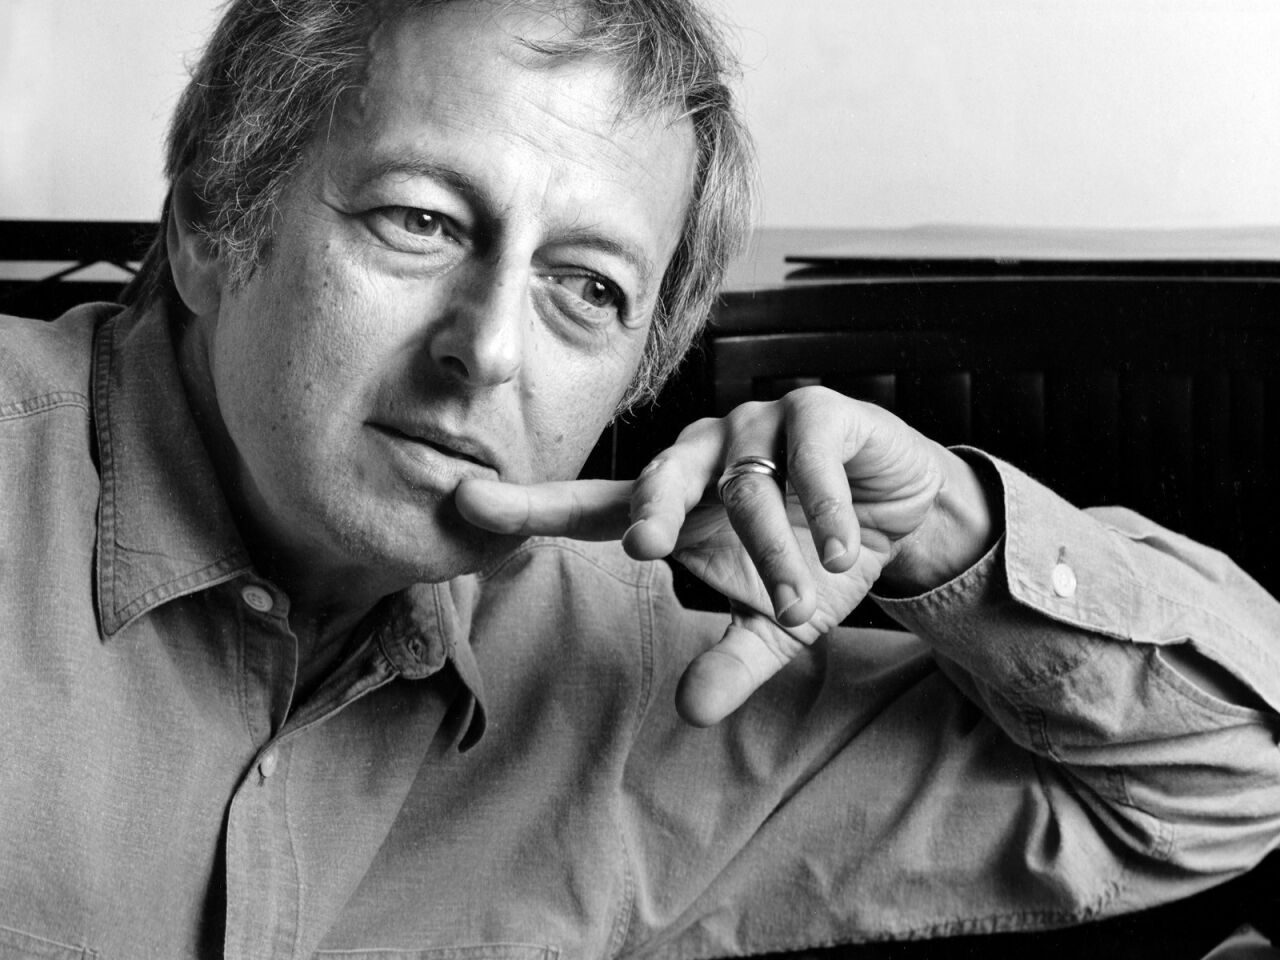 André Previn conquered L.A. with his artistic genius twice: first as an Academy Award winning composer of Hollywood movie music, then as music director of the Los Angeles Philharmonic. A conductor and pianist who toggled between classical, pop and jazz, Previn won Oscars for “My Fair Lady” (1964), “Irma la Douce” (1963), “Gigi” (1958) and “Porgy and Bess” (1959). He was 89.